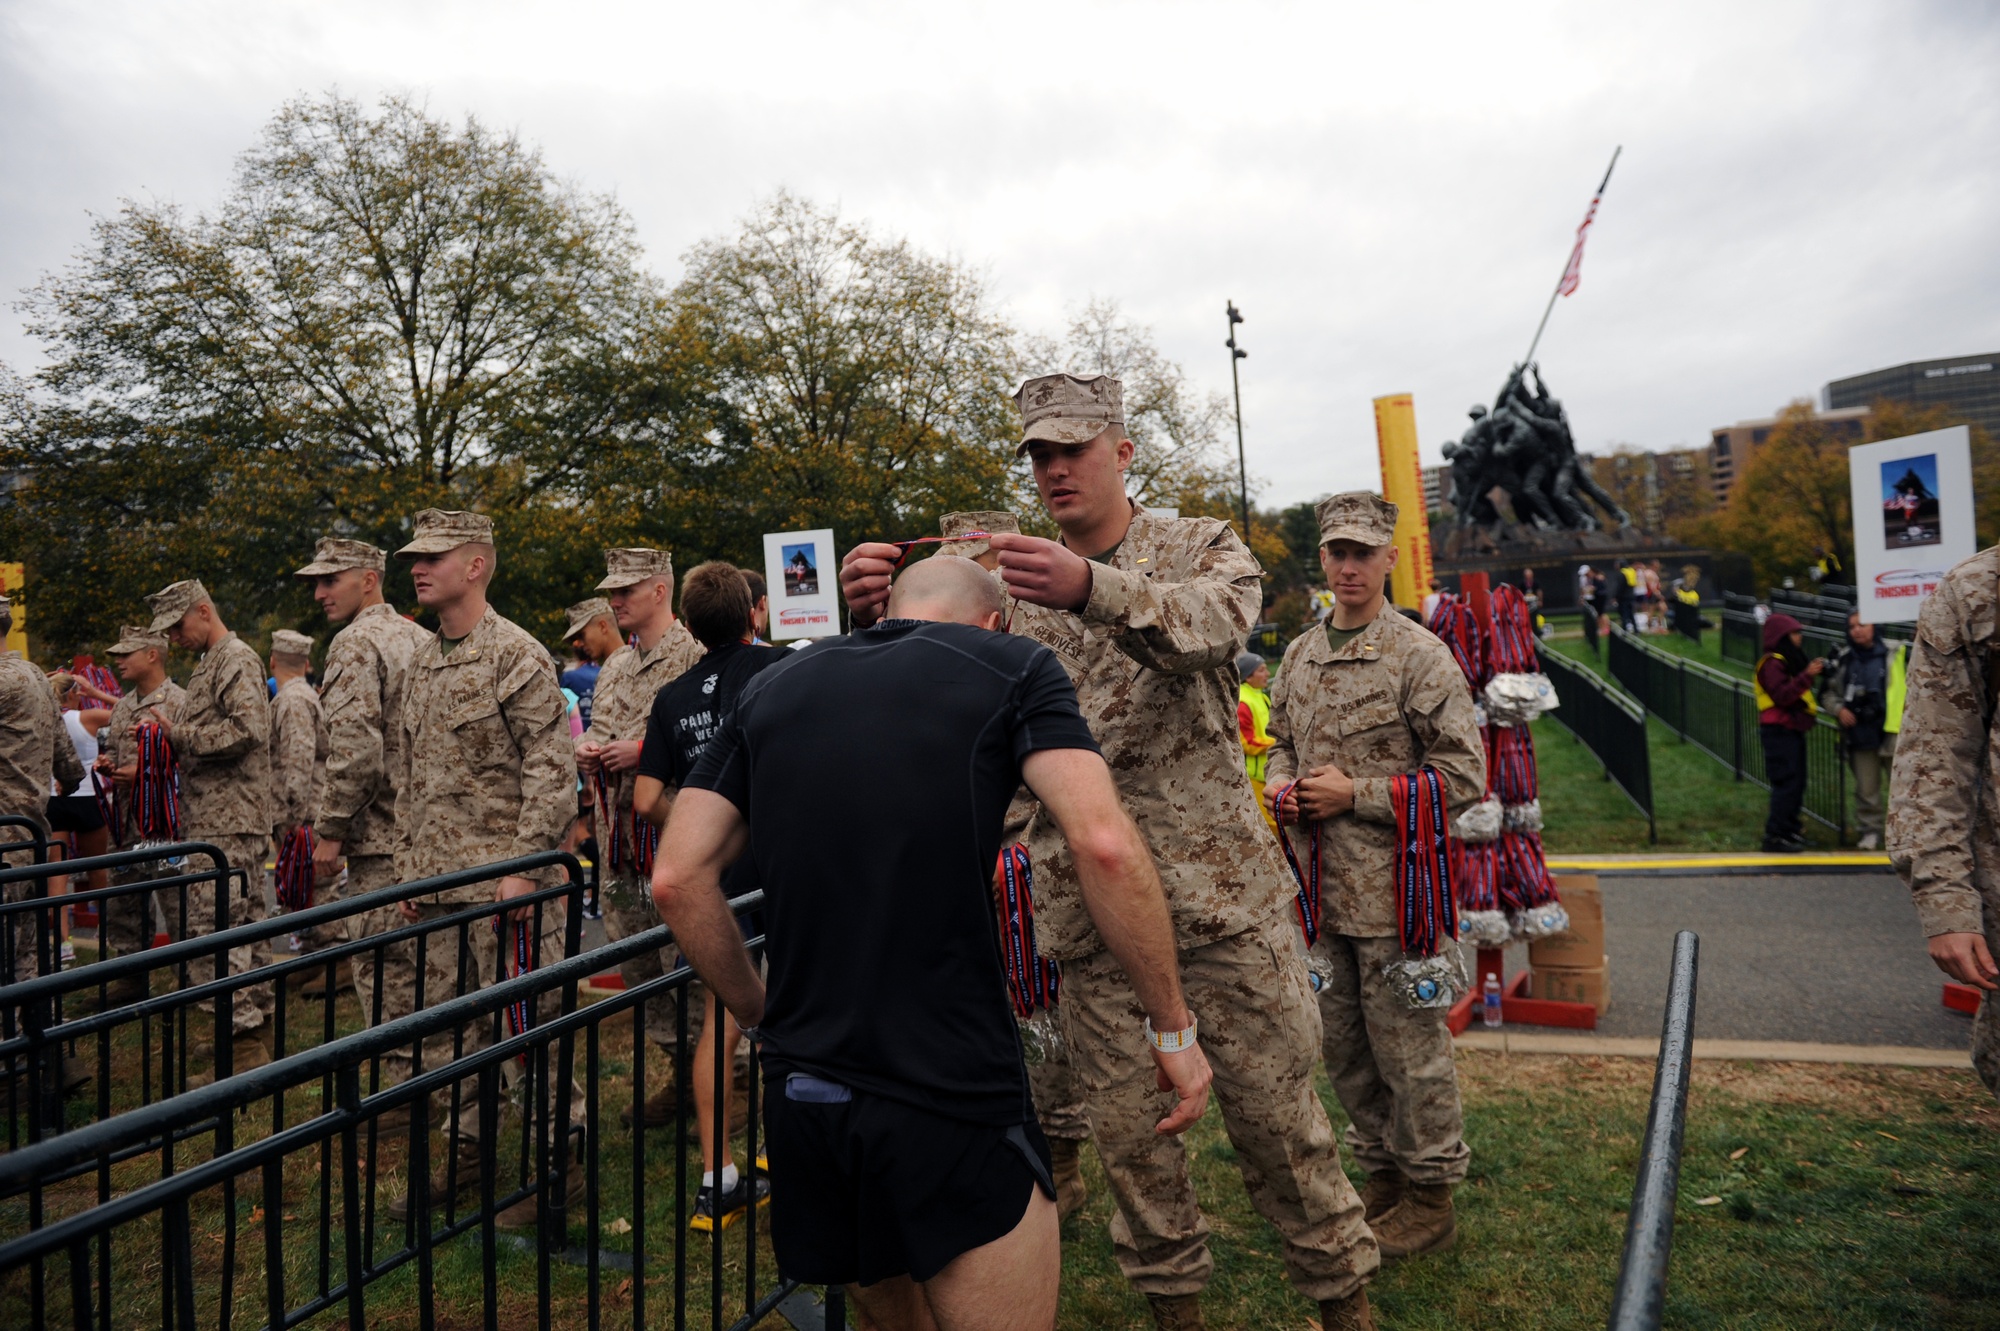 DVIDS - News - New leaders of the Marine Corps ends marathon with